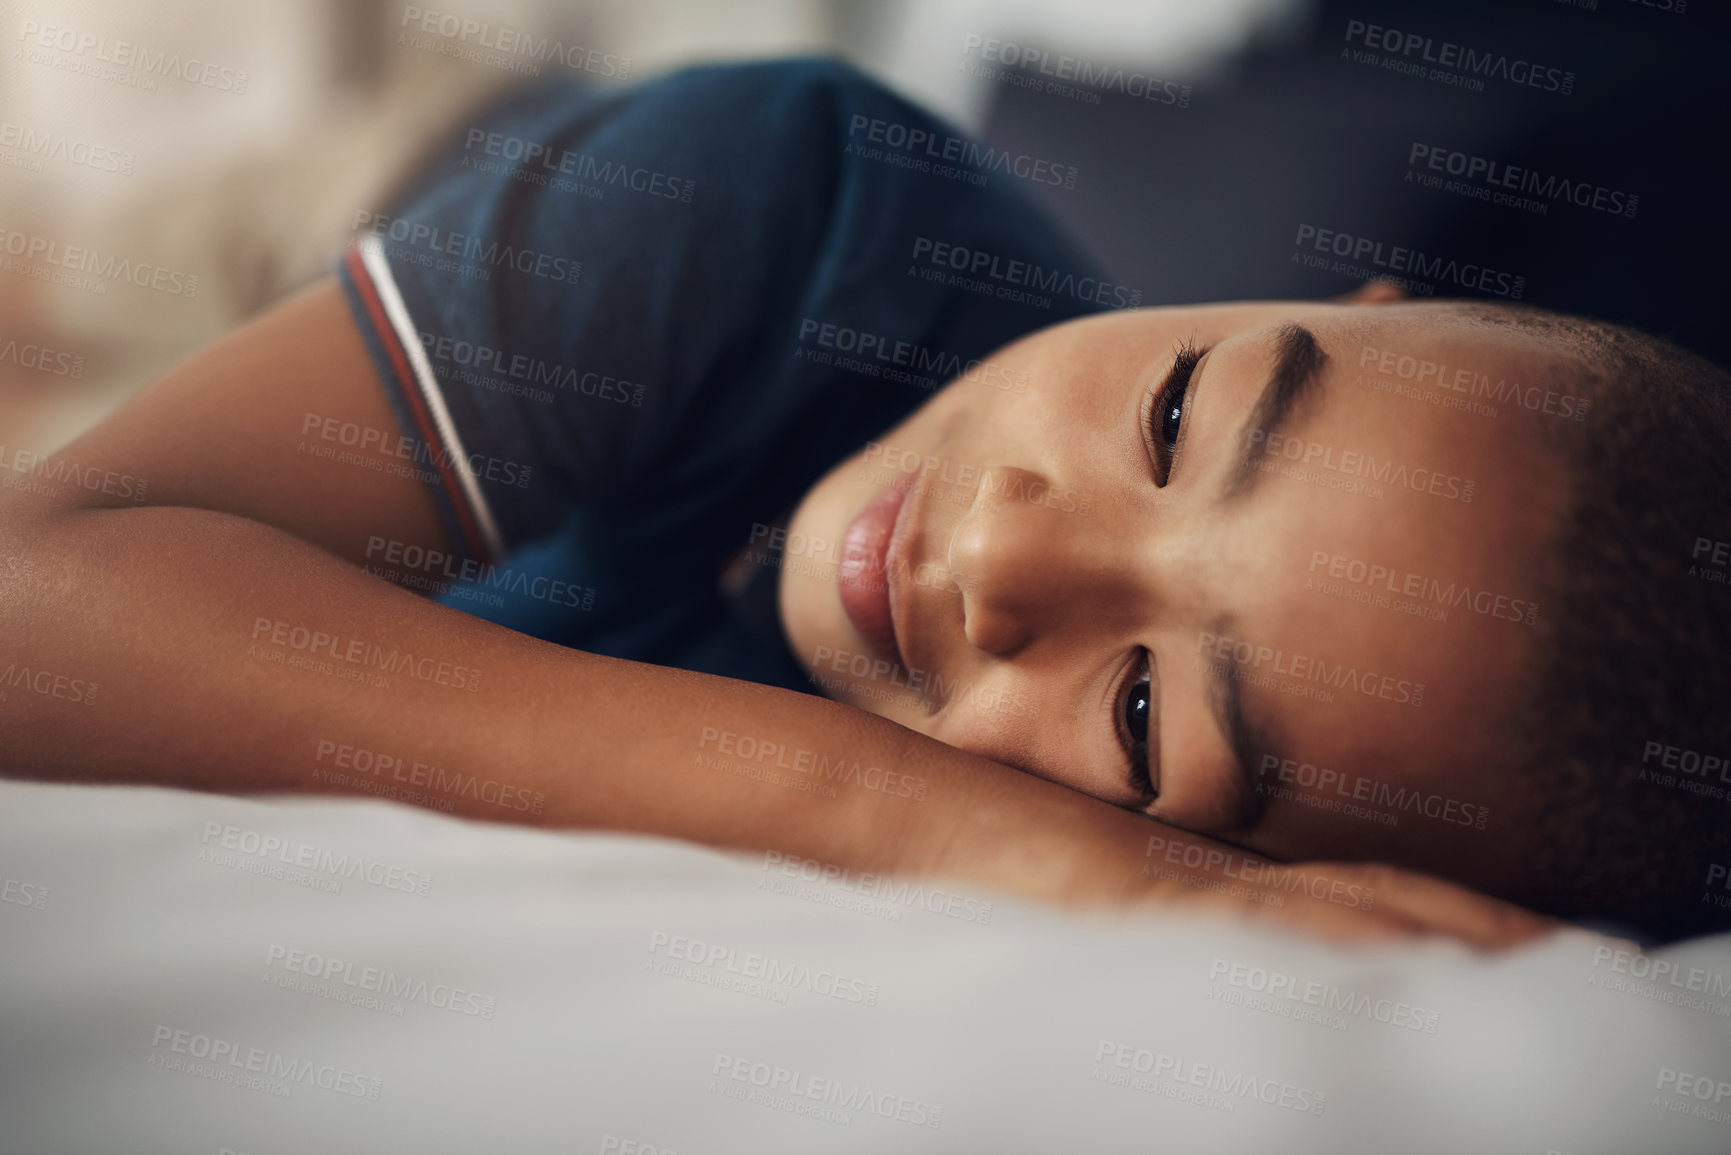 Buy stock photo Shot of an adorable little boy lying on his bed at home